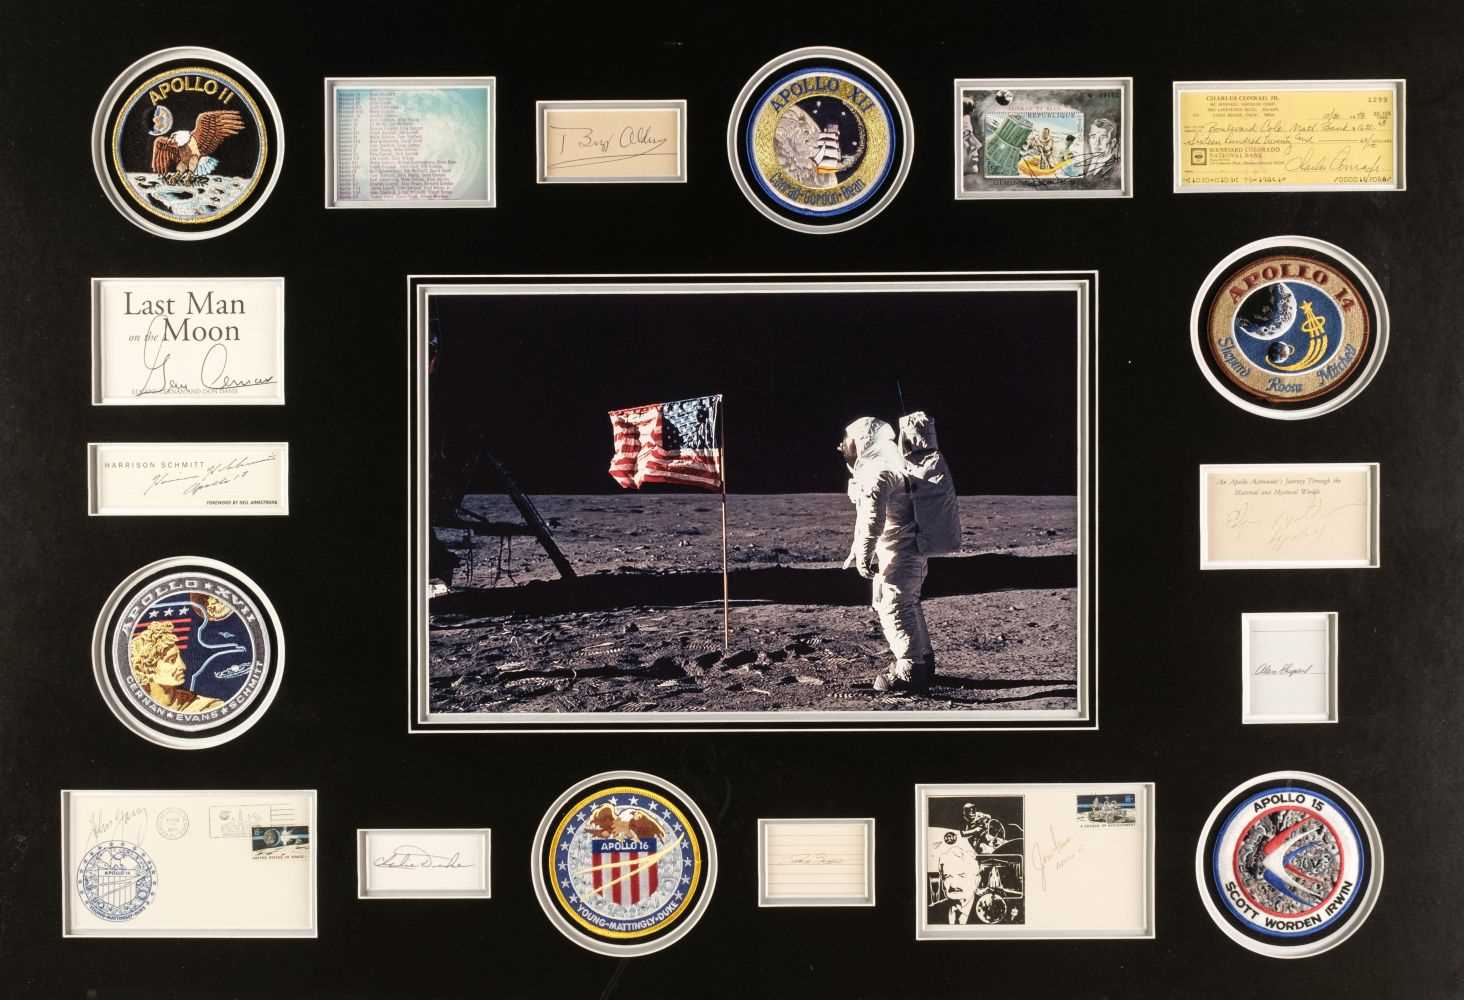 Lot 356 - Moonwalkers. A NASA Apollo Missions’ Moonwalkers’ autographs wall display piece